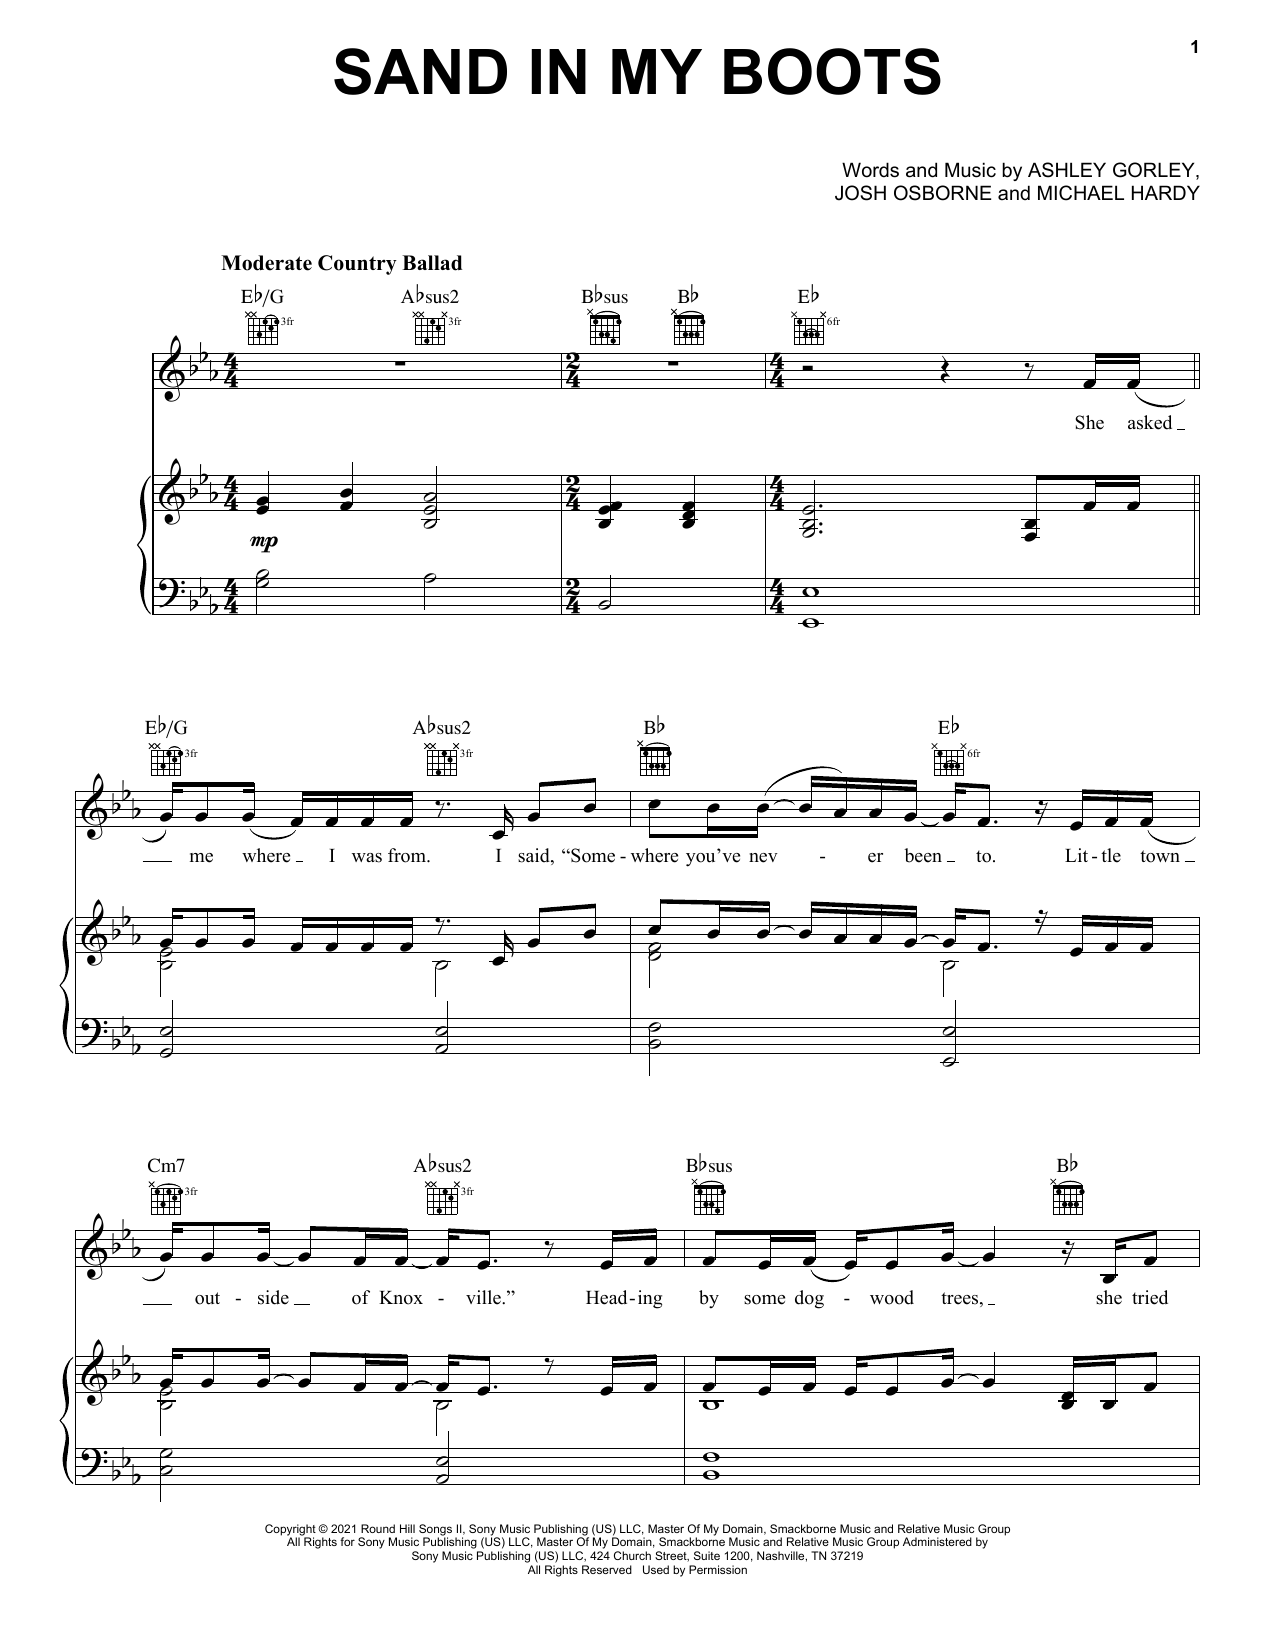 Morgan Wallen Sand In My Boots sheet music notes and chords. Download Printable PDF.